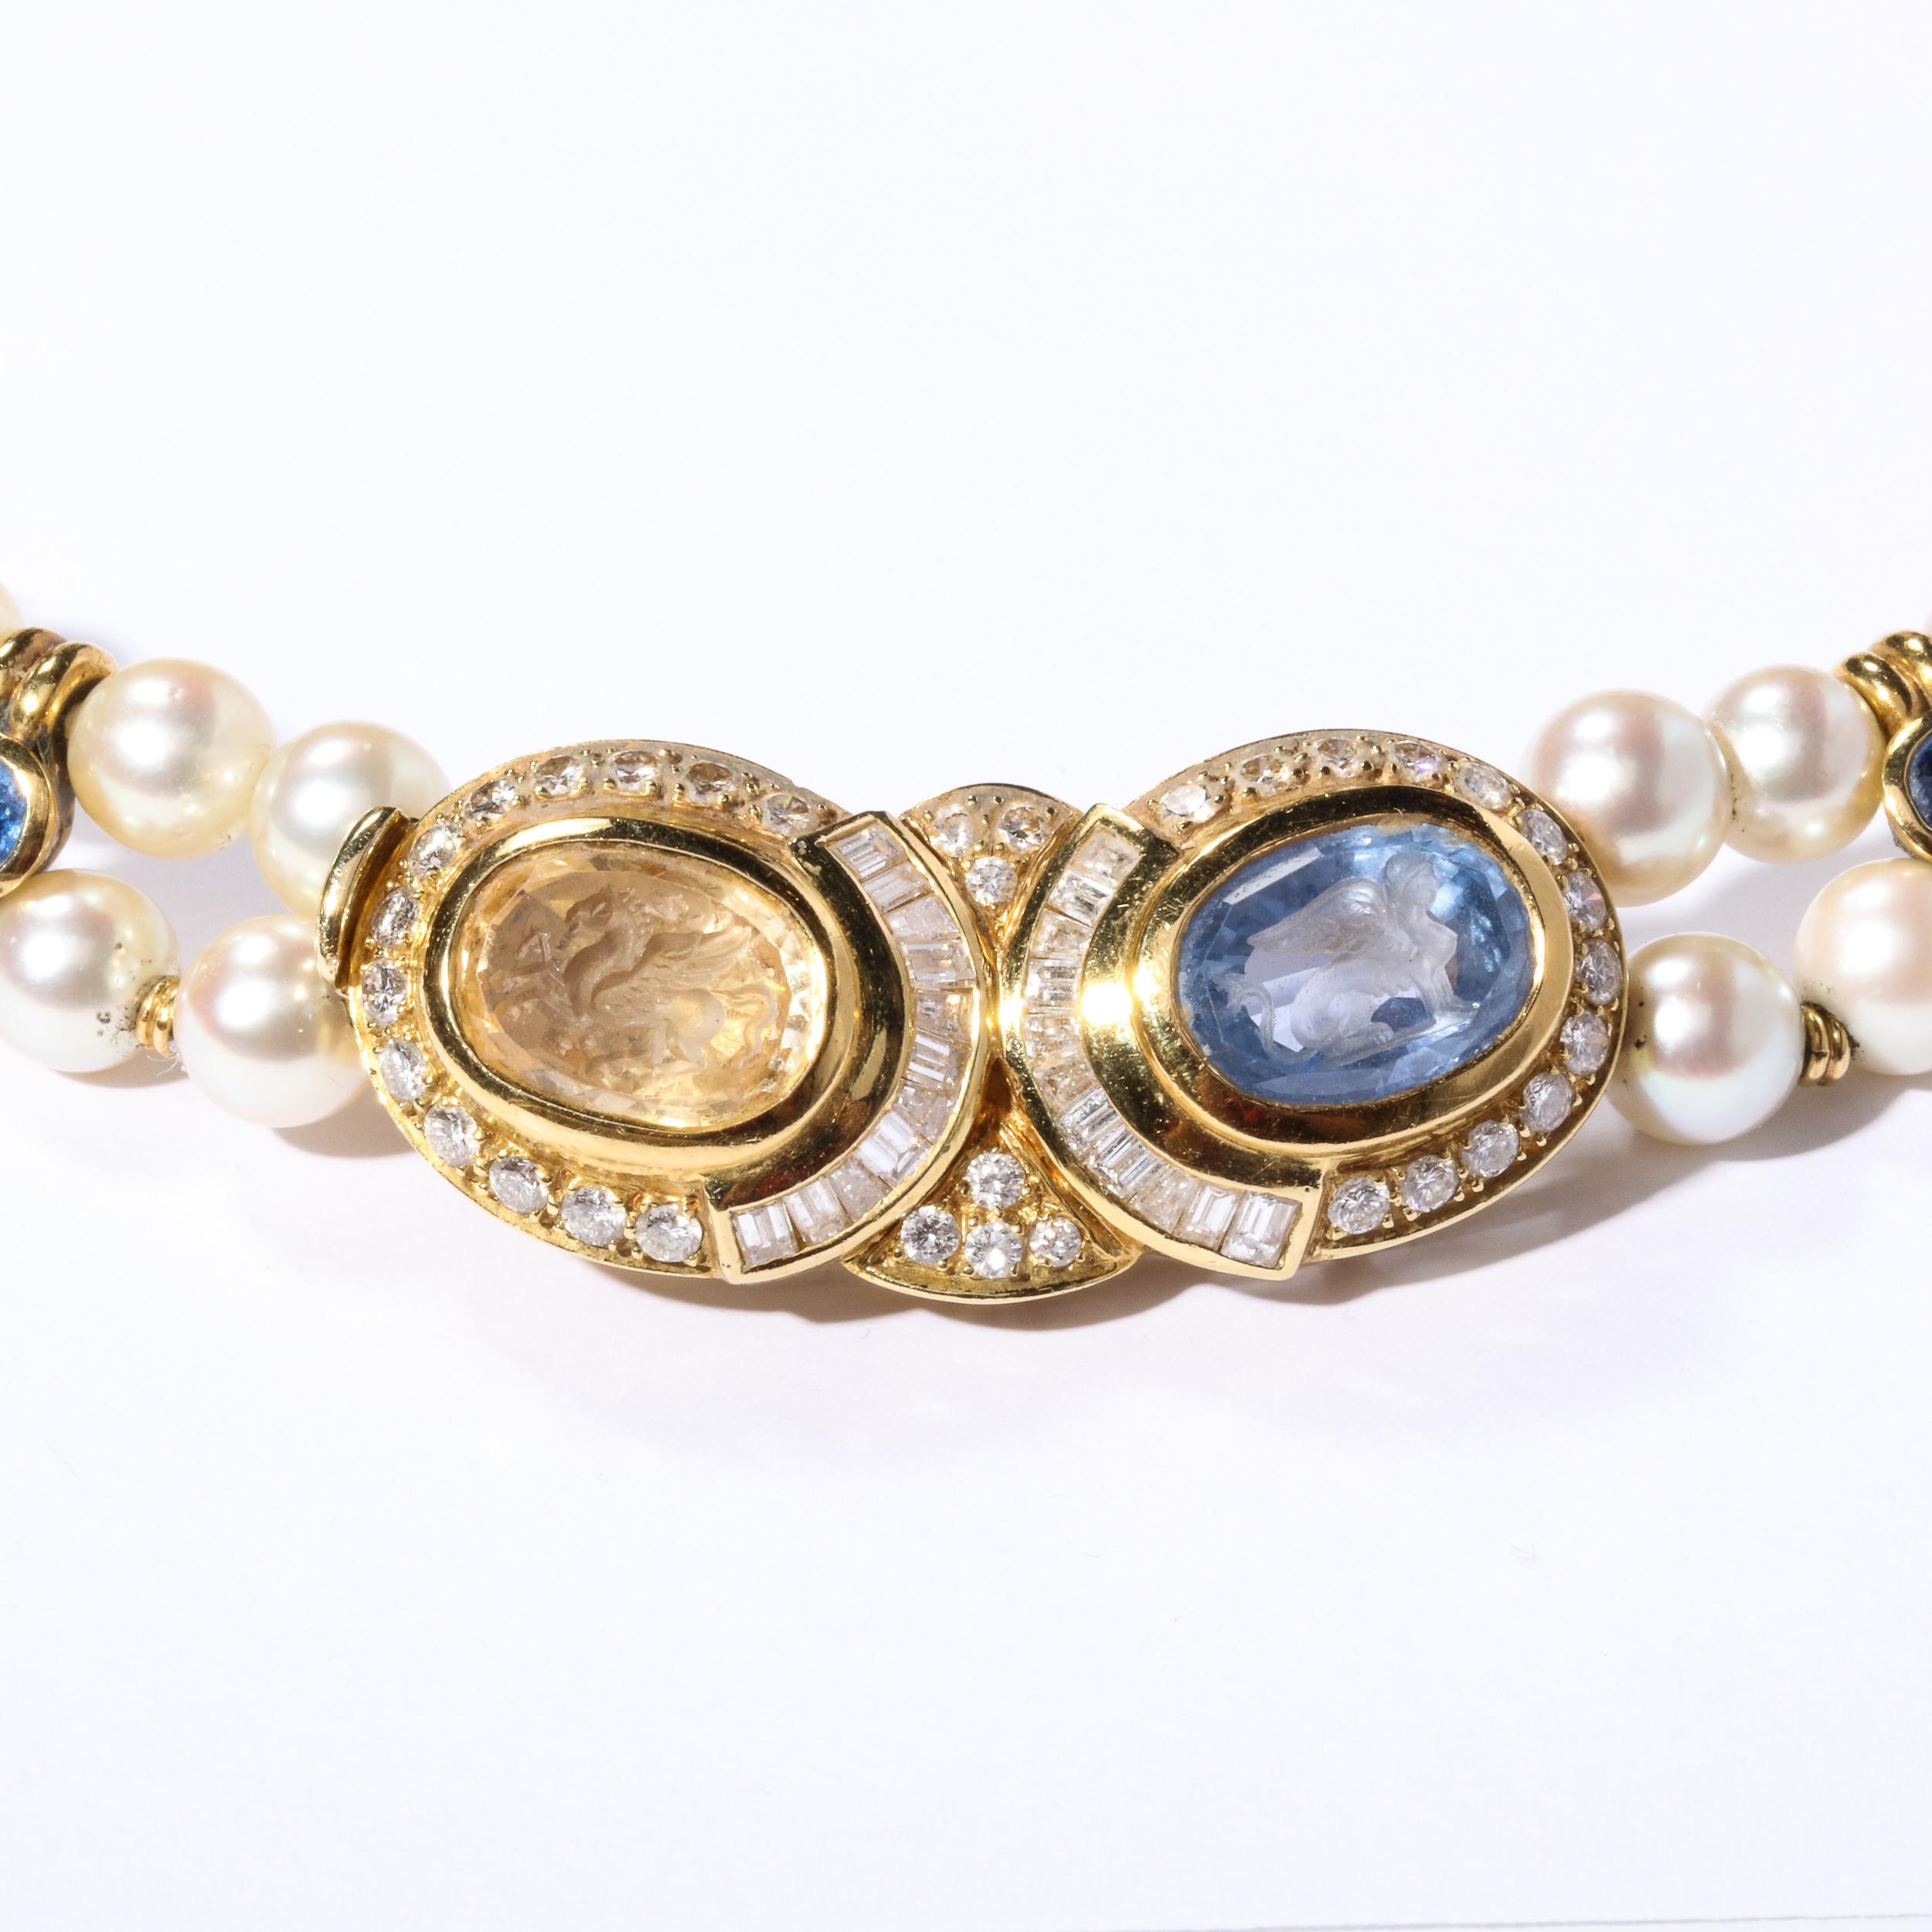 Neoclassical Double Strand Pearl Necklace  with Carved Citrine & Iolite, 18k and Diamonds  For Sale